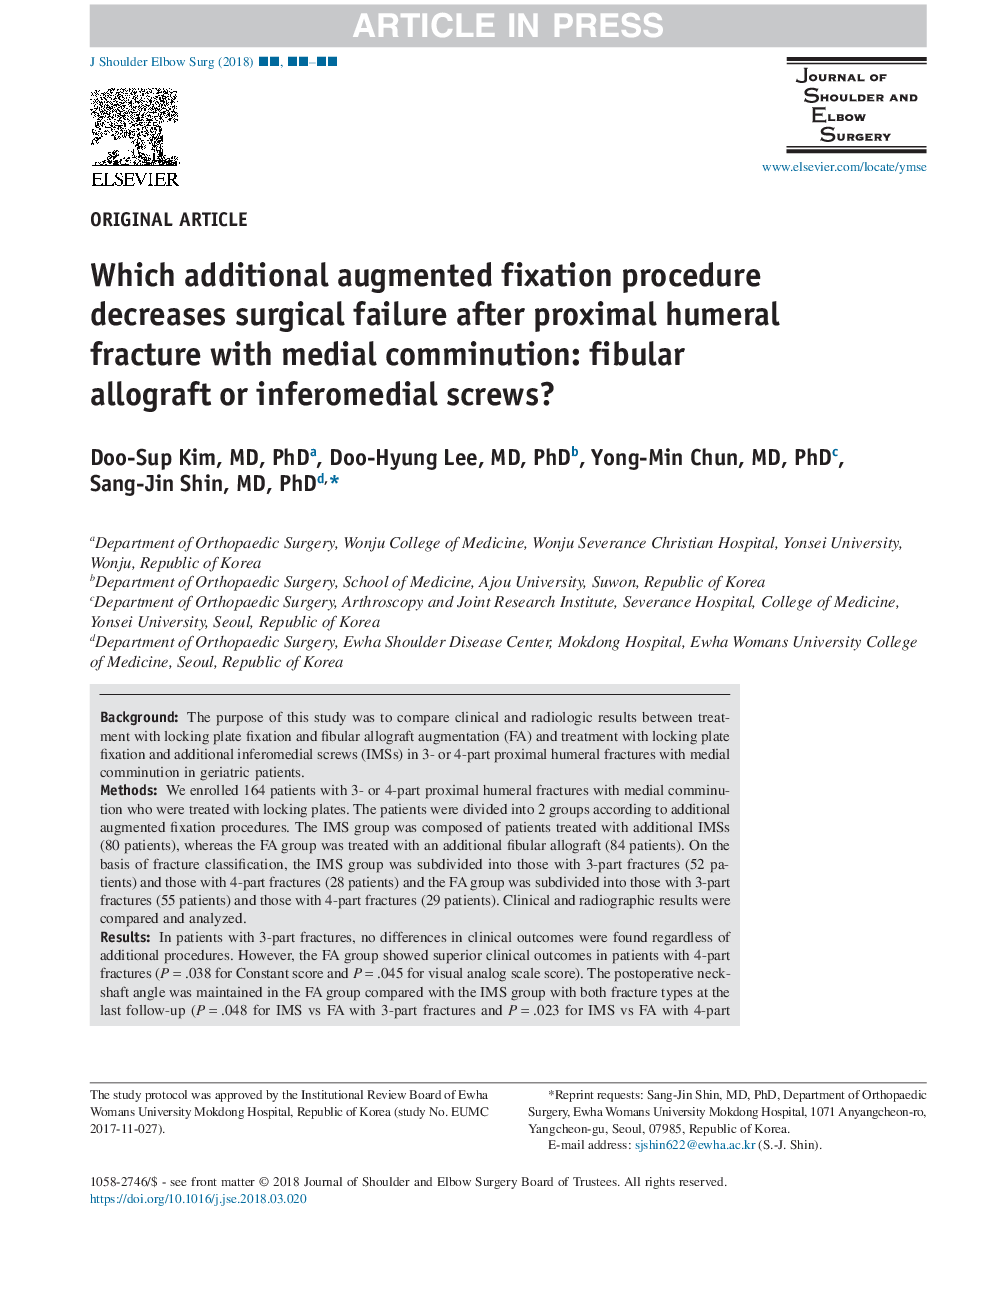 Which additional augmented fixation procedure decreases surgical failure after proximal humeral fracture with medial comminution: fibular allograft or inferomedial screws?